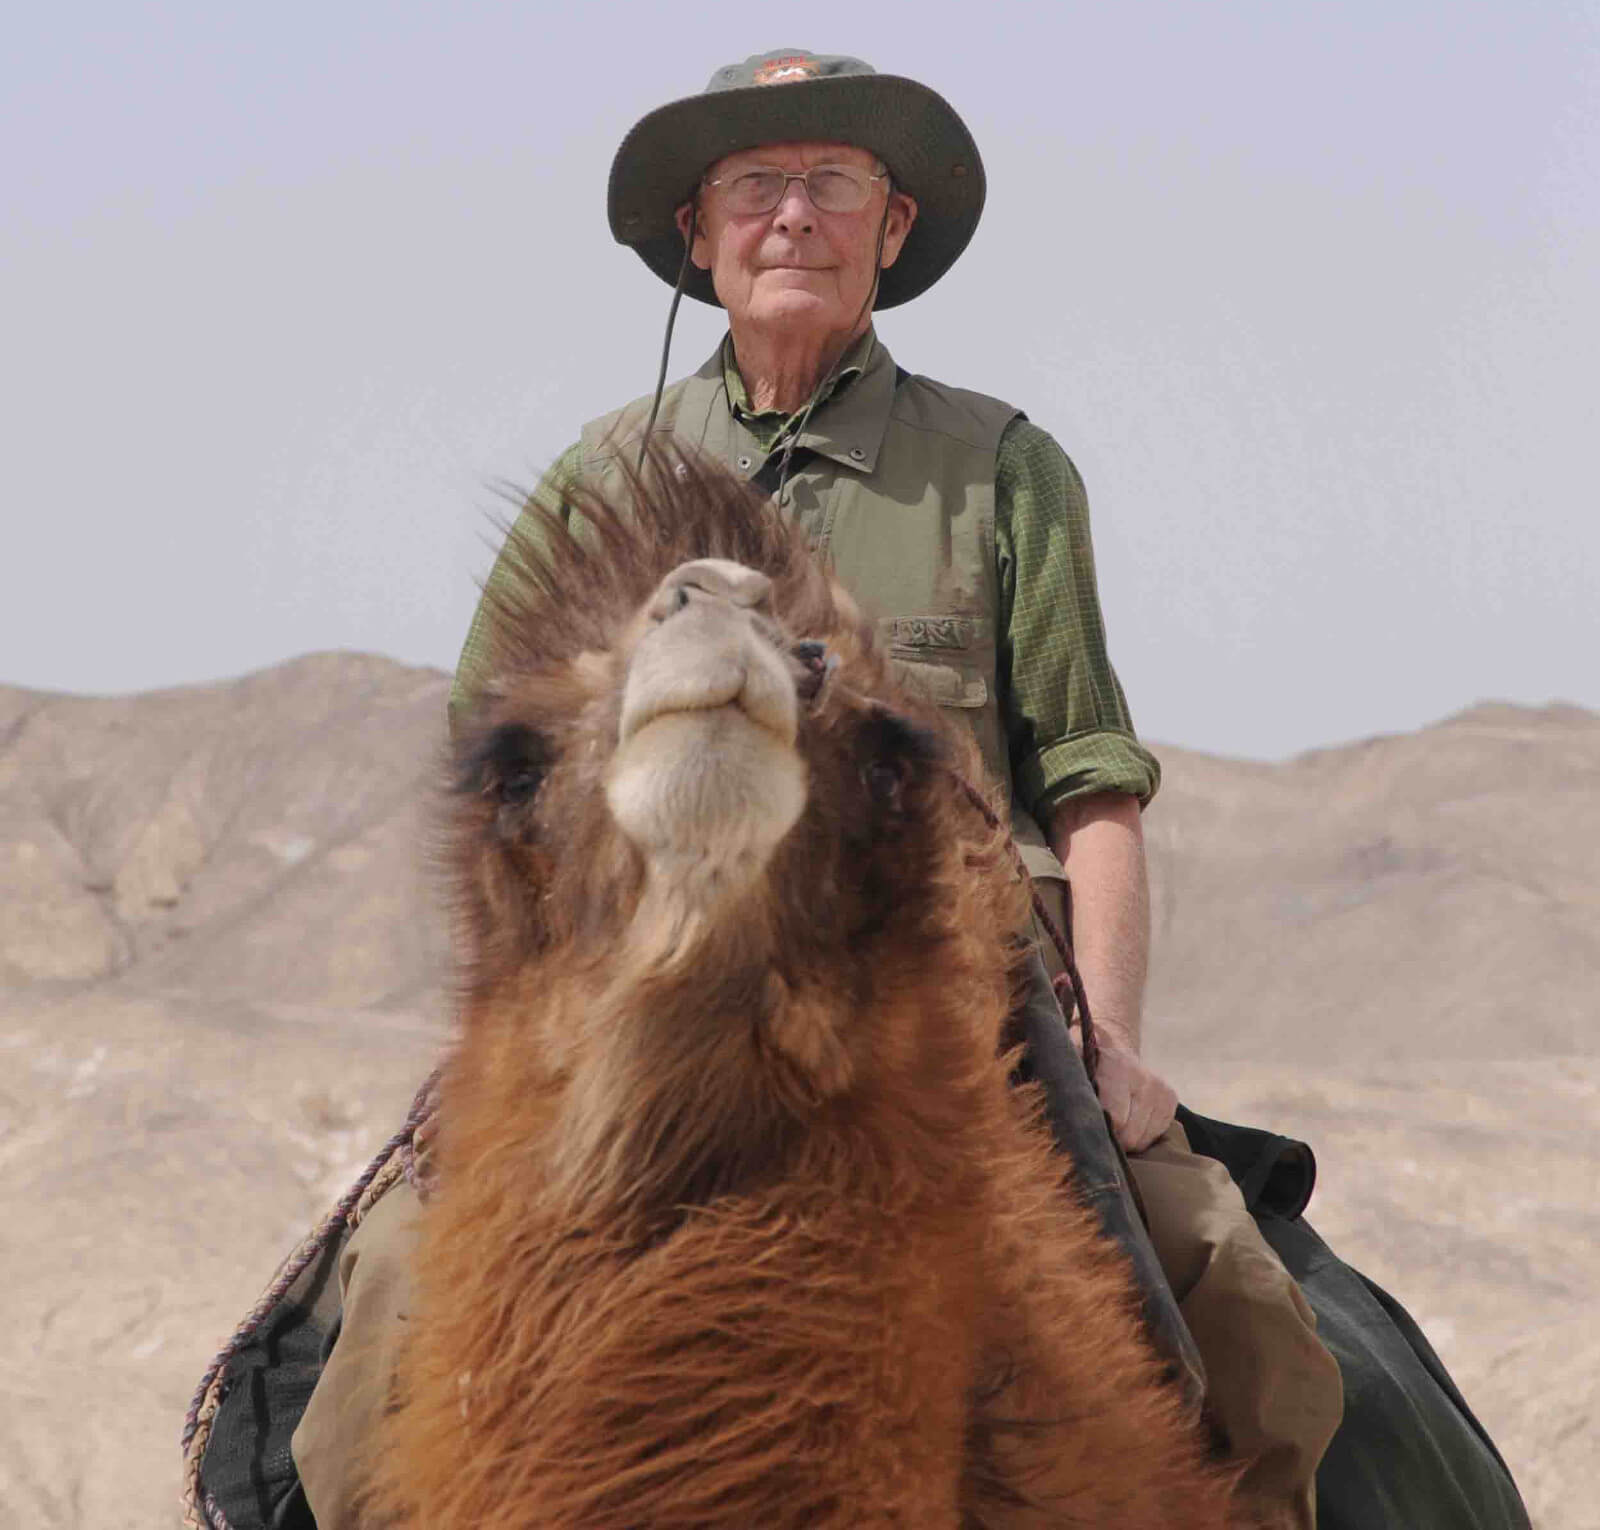 John Hare, mounted on a Bactrian camel, 2011 expedition Desert of Lop, China